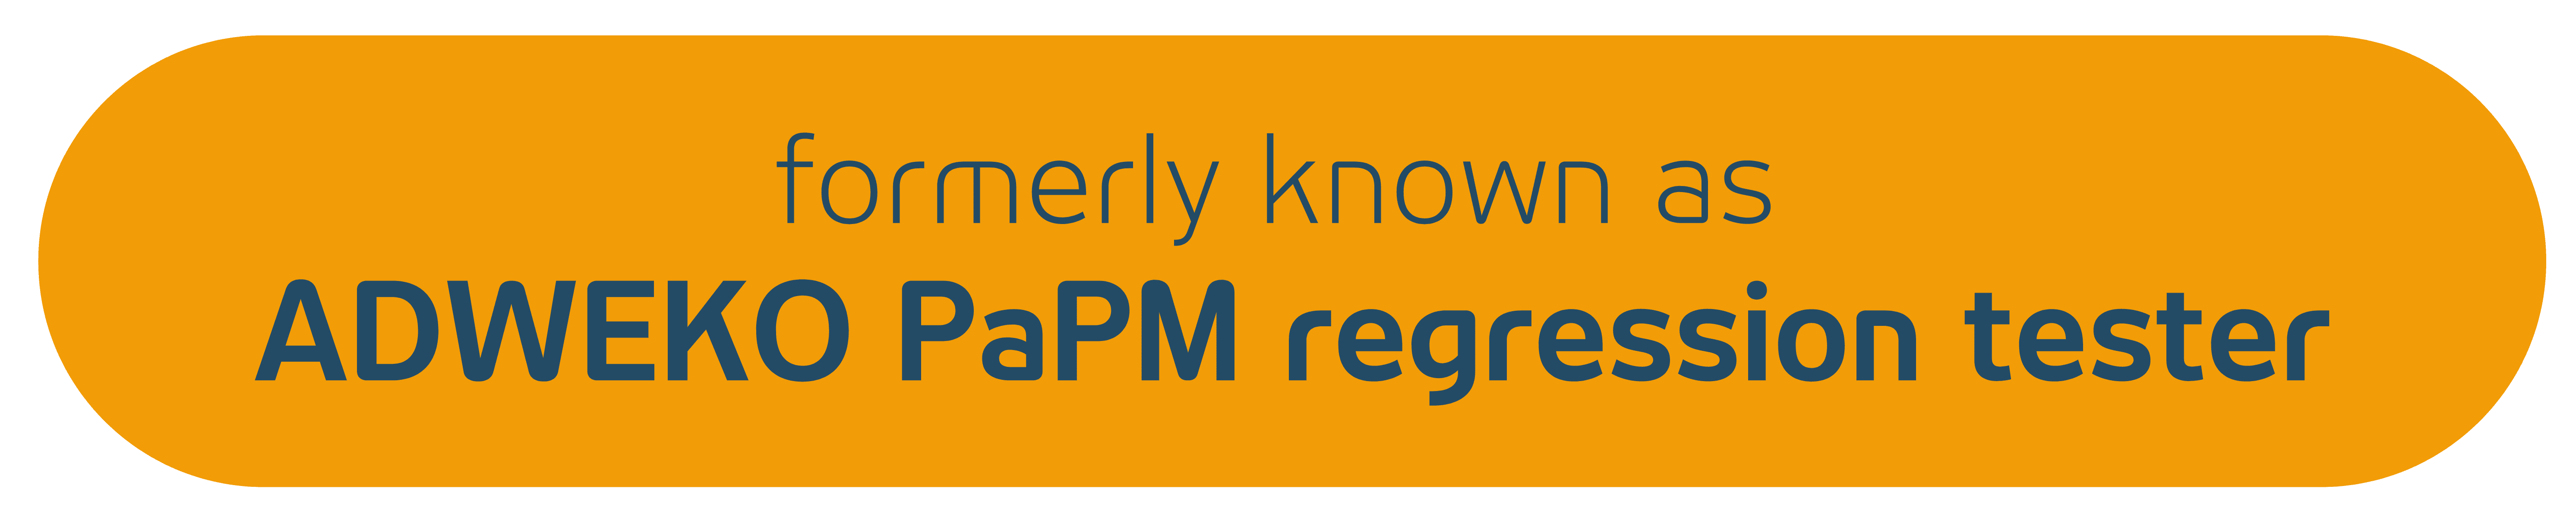 ADWEKO PaPM regression tester is now ADWEKO Control for PaPM